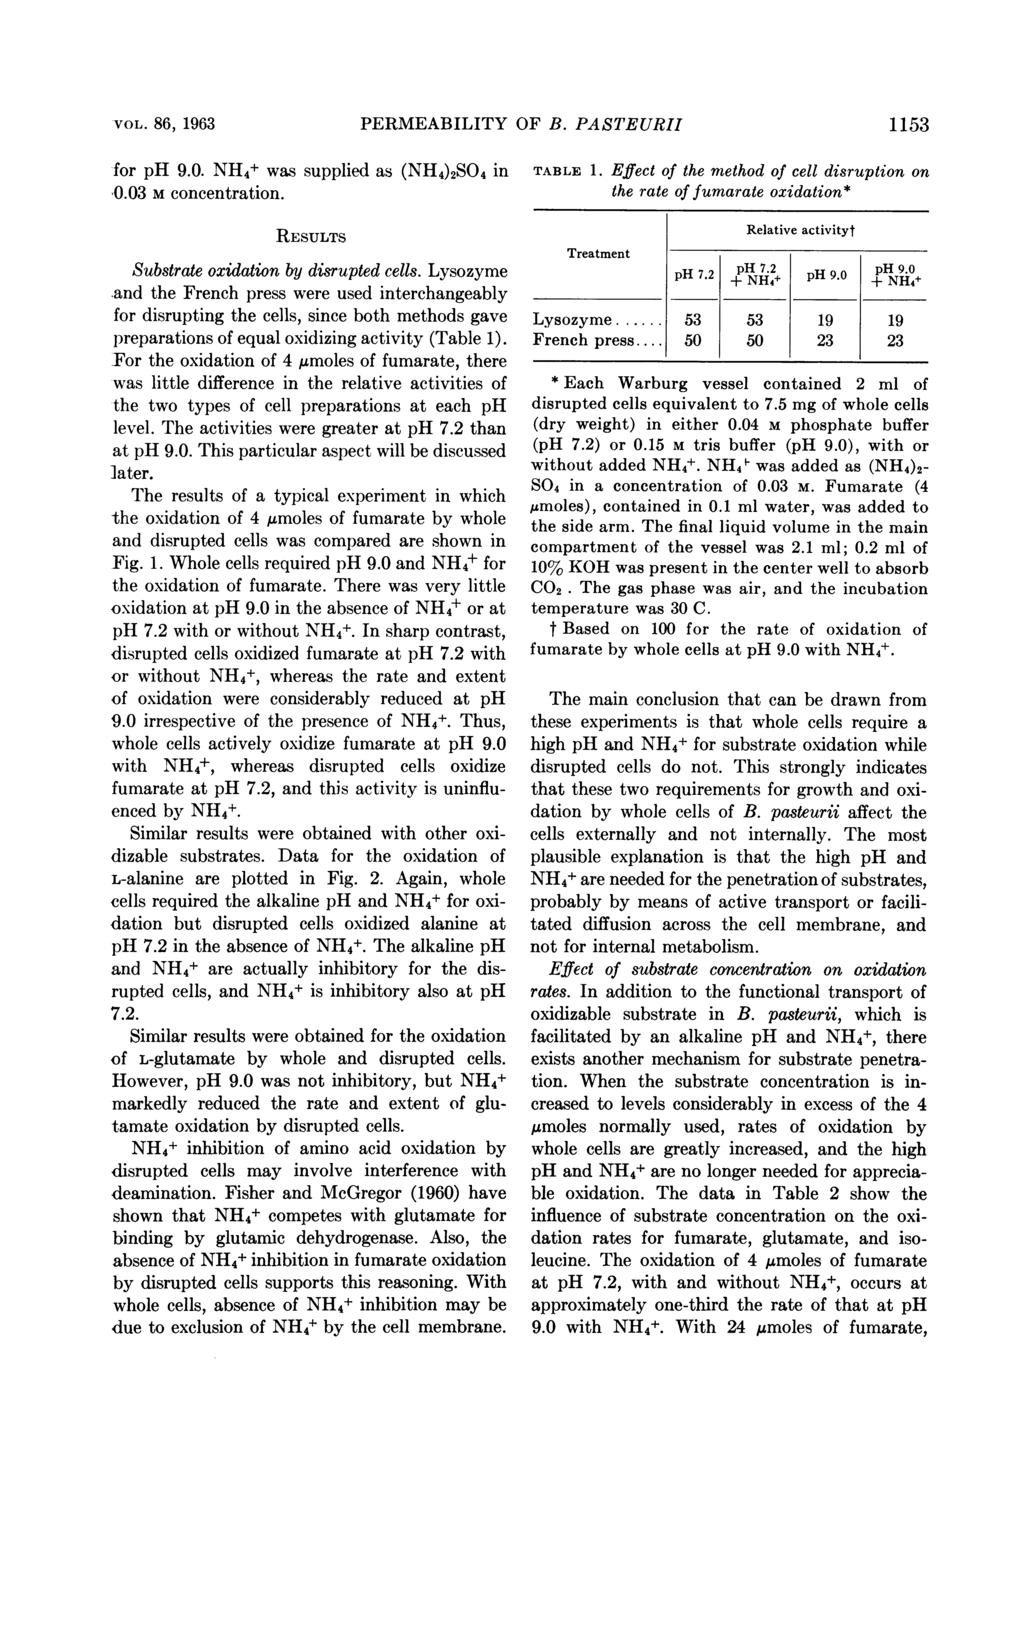 VOL. 86, 1963 PERMEABILITY OF B. PASTEURII 1153 -for ph 9.. NH4+ was supplied as (NH4)2S4 in.3 M concentration. RESULTS Substrate oxidation by disrupted cells. Lysozyme.